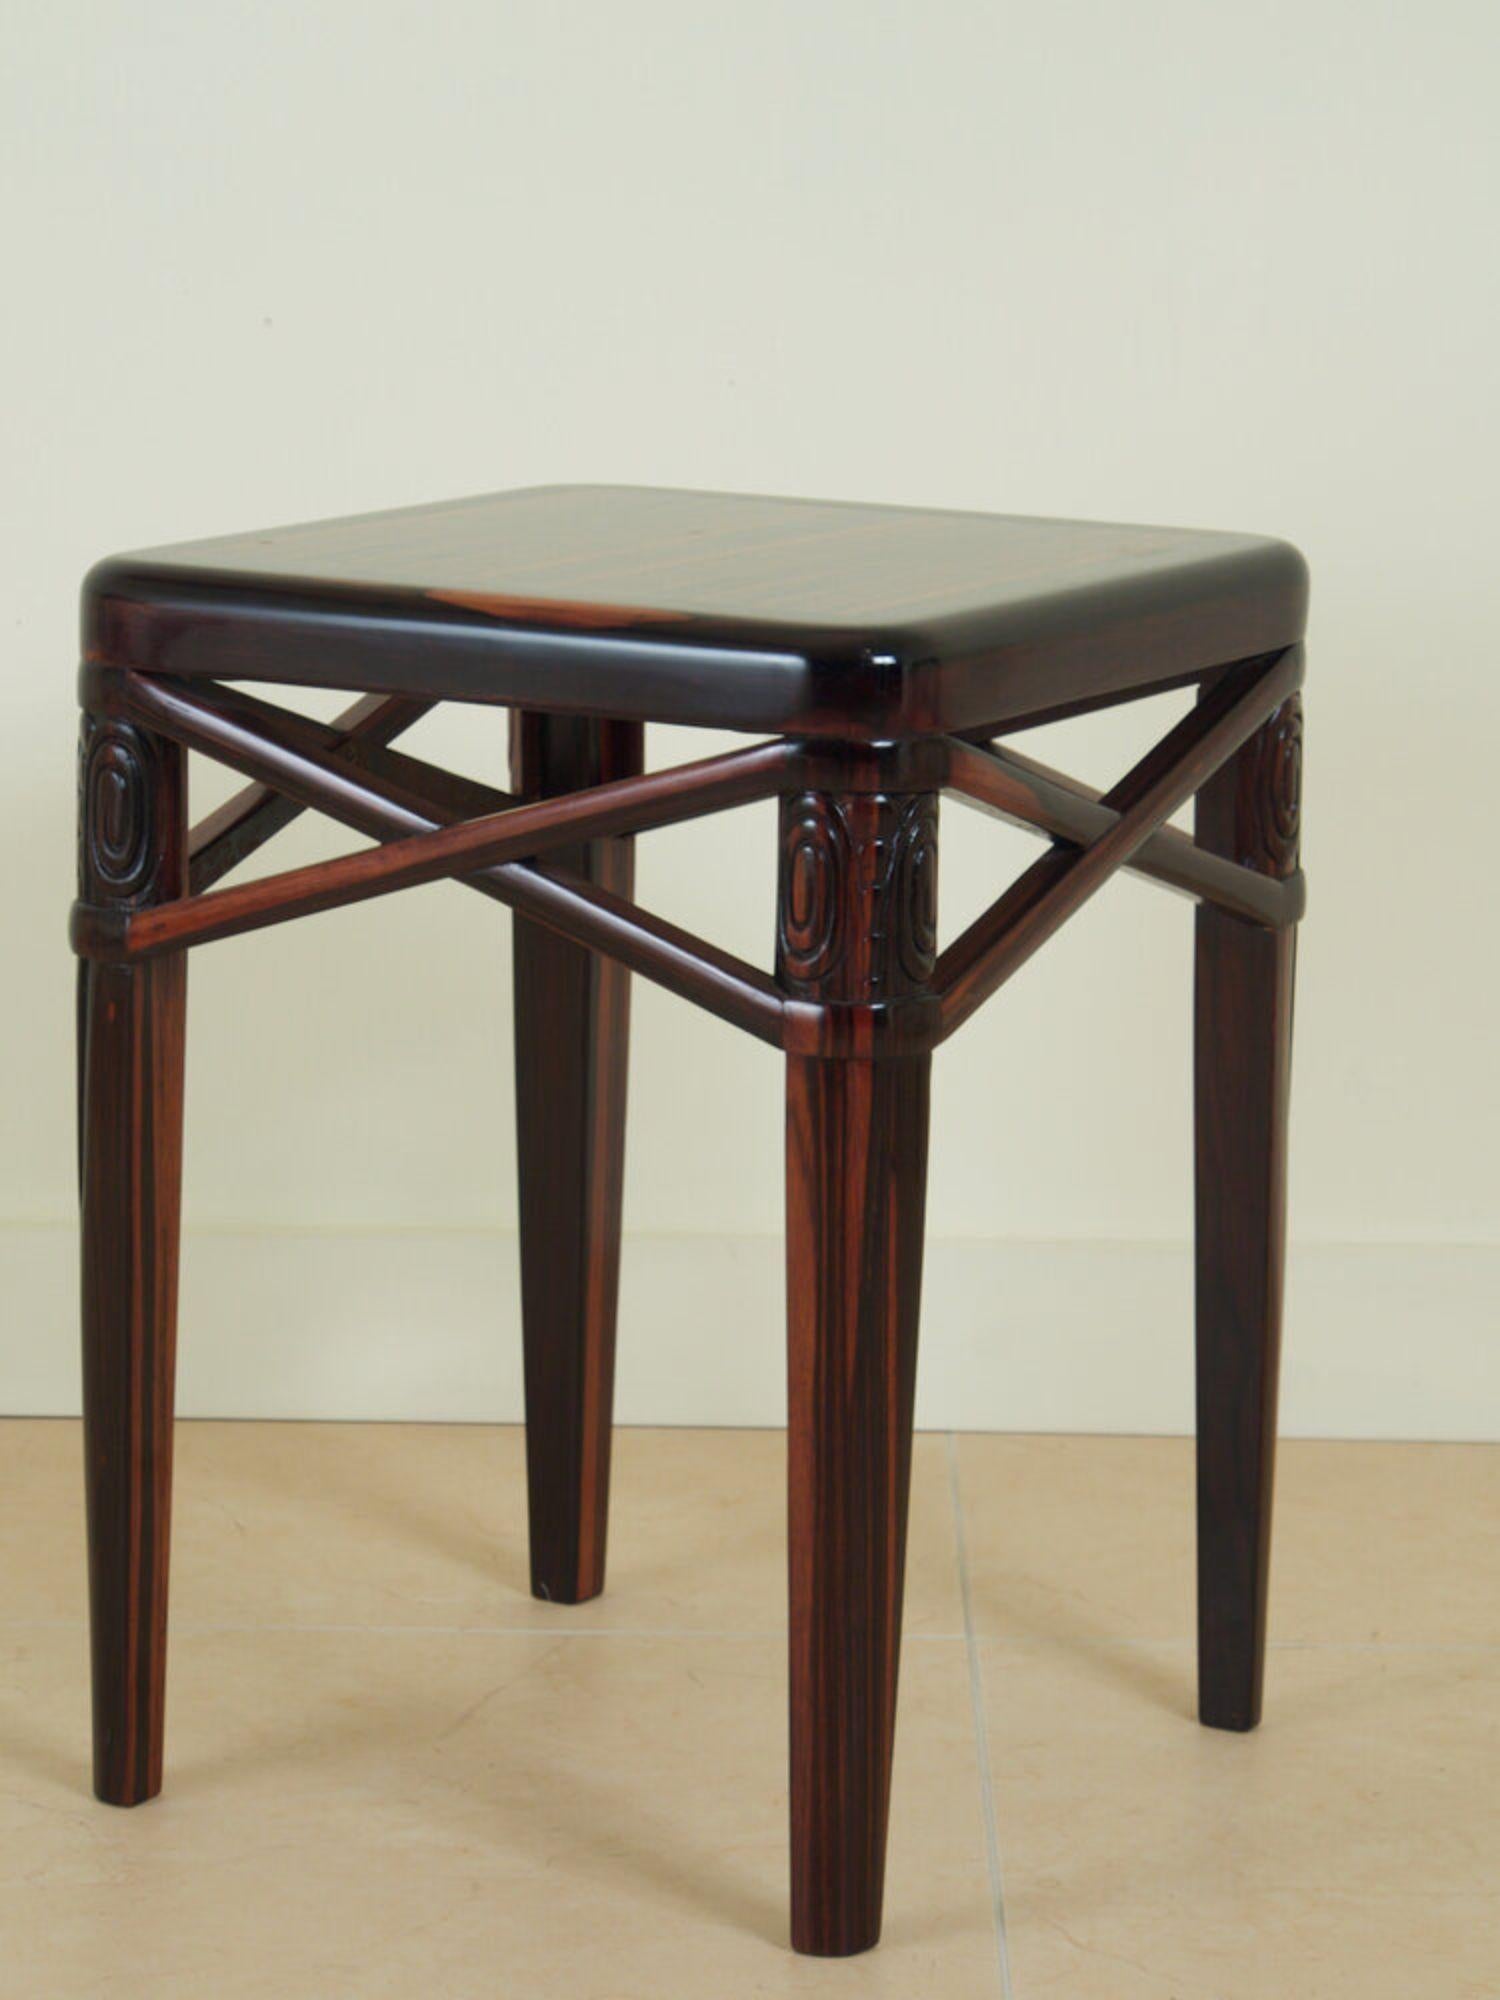 Ruhlmann Small Side Table in Macassar Ebony For Sale at 1stDibs